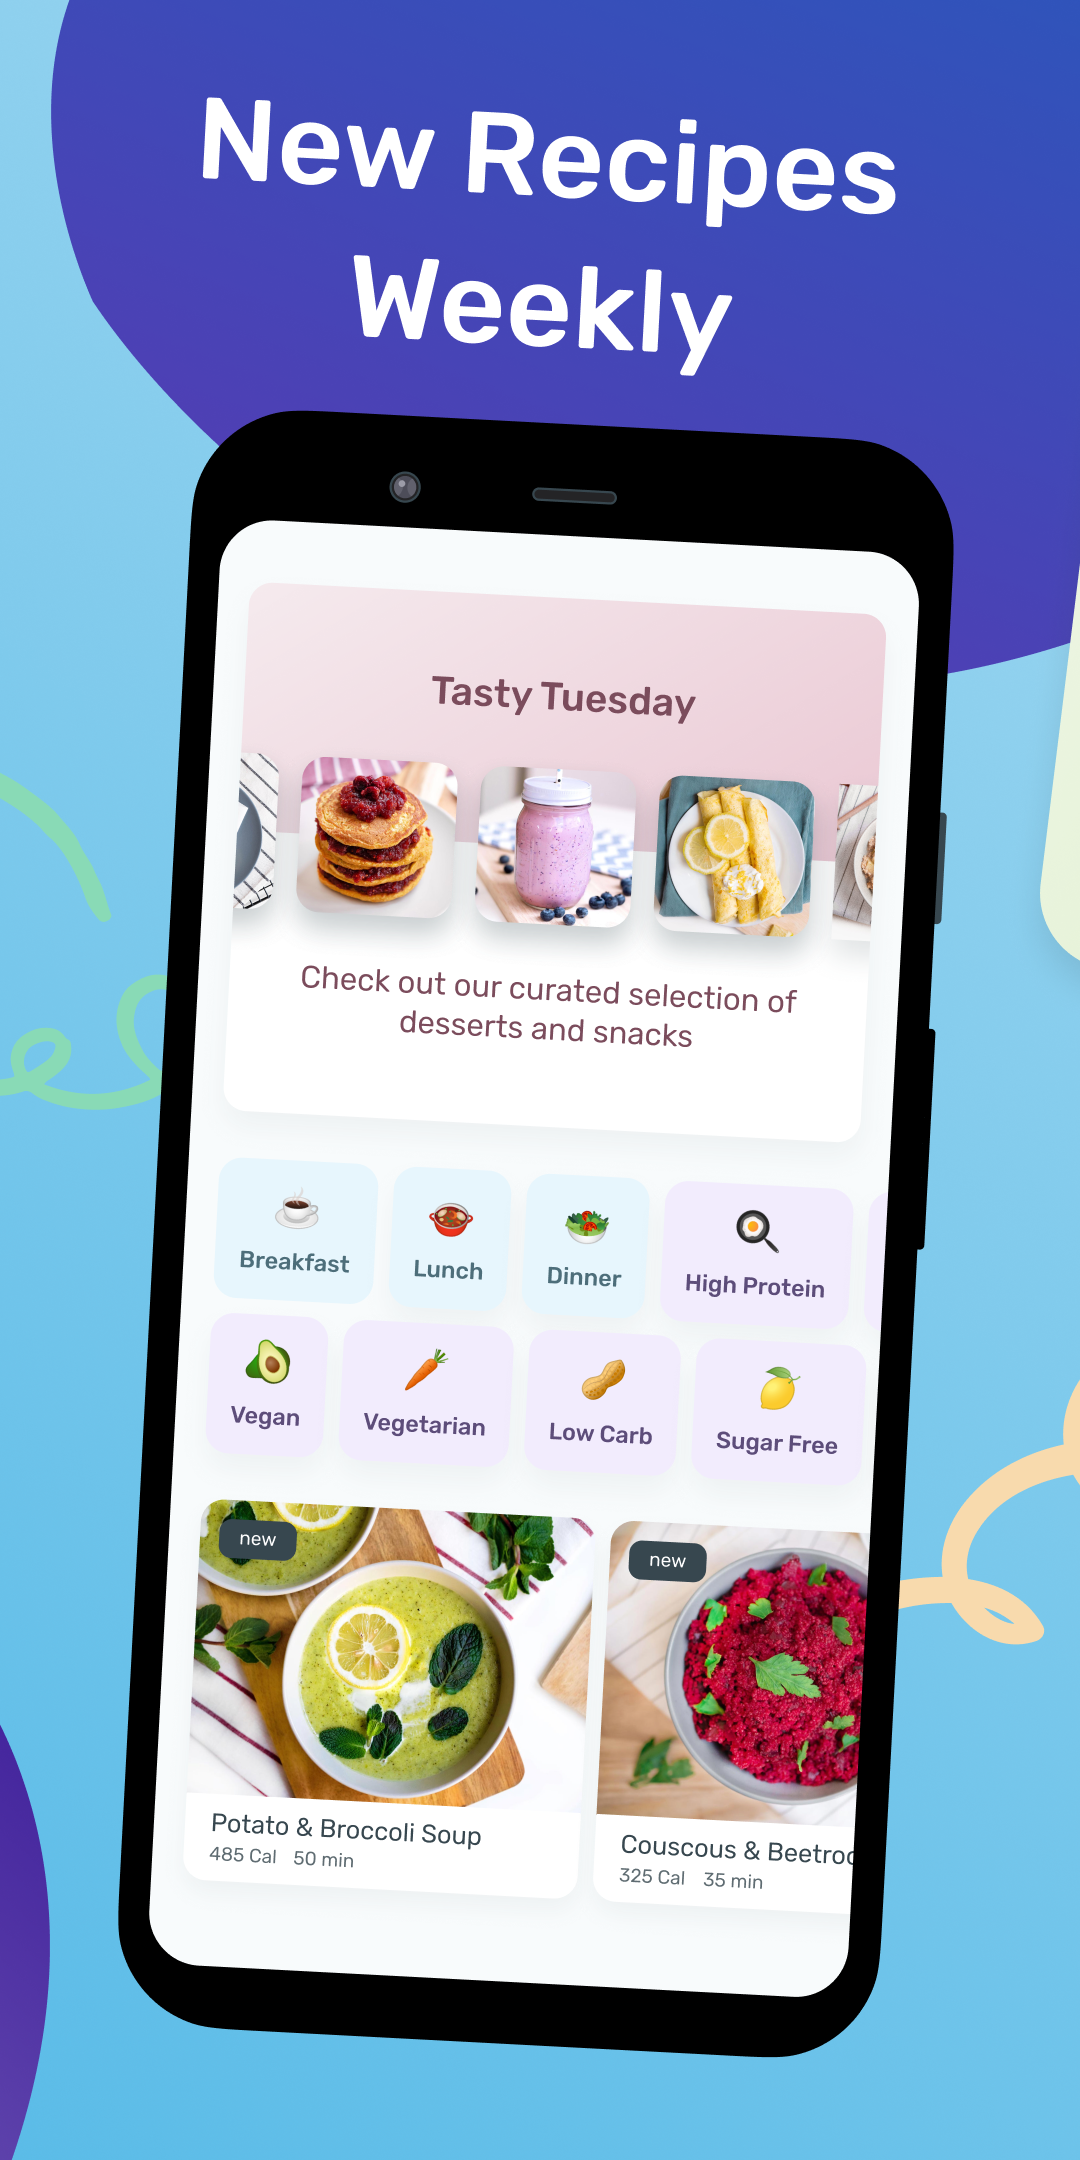 YAZIO Fasting & Food Tracker APK 7.9.2 for Android – Download YAZIO Fasting  & Food Tracker APK Latest Version from APKFab.com